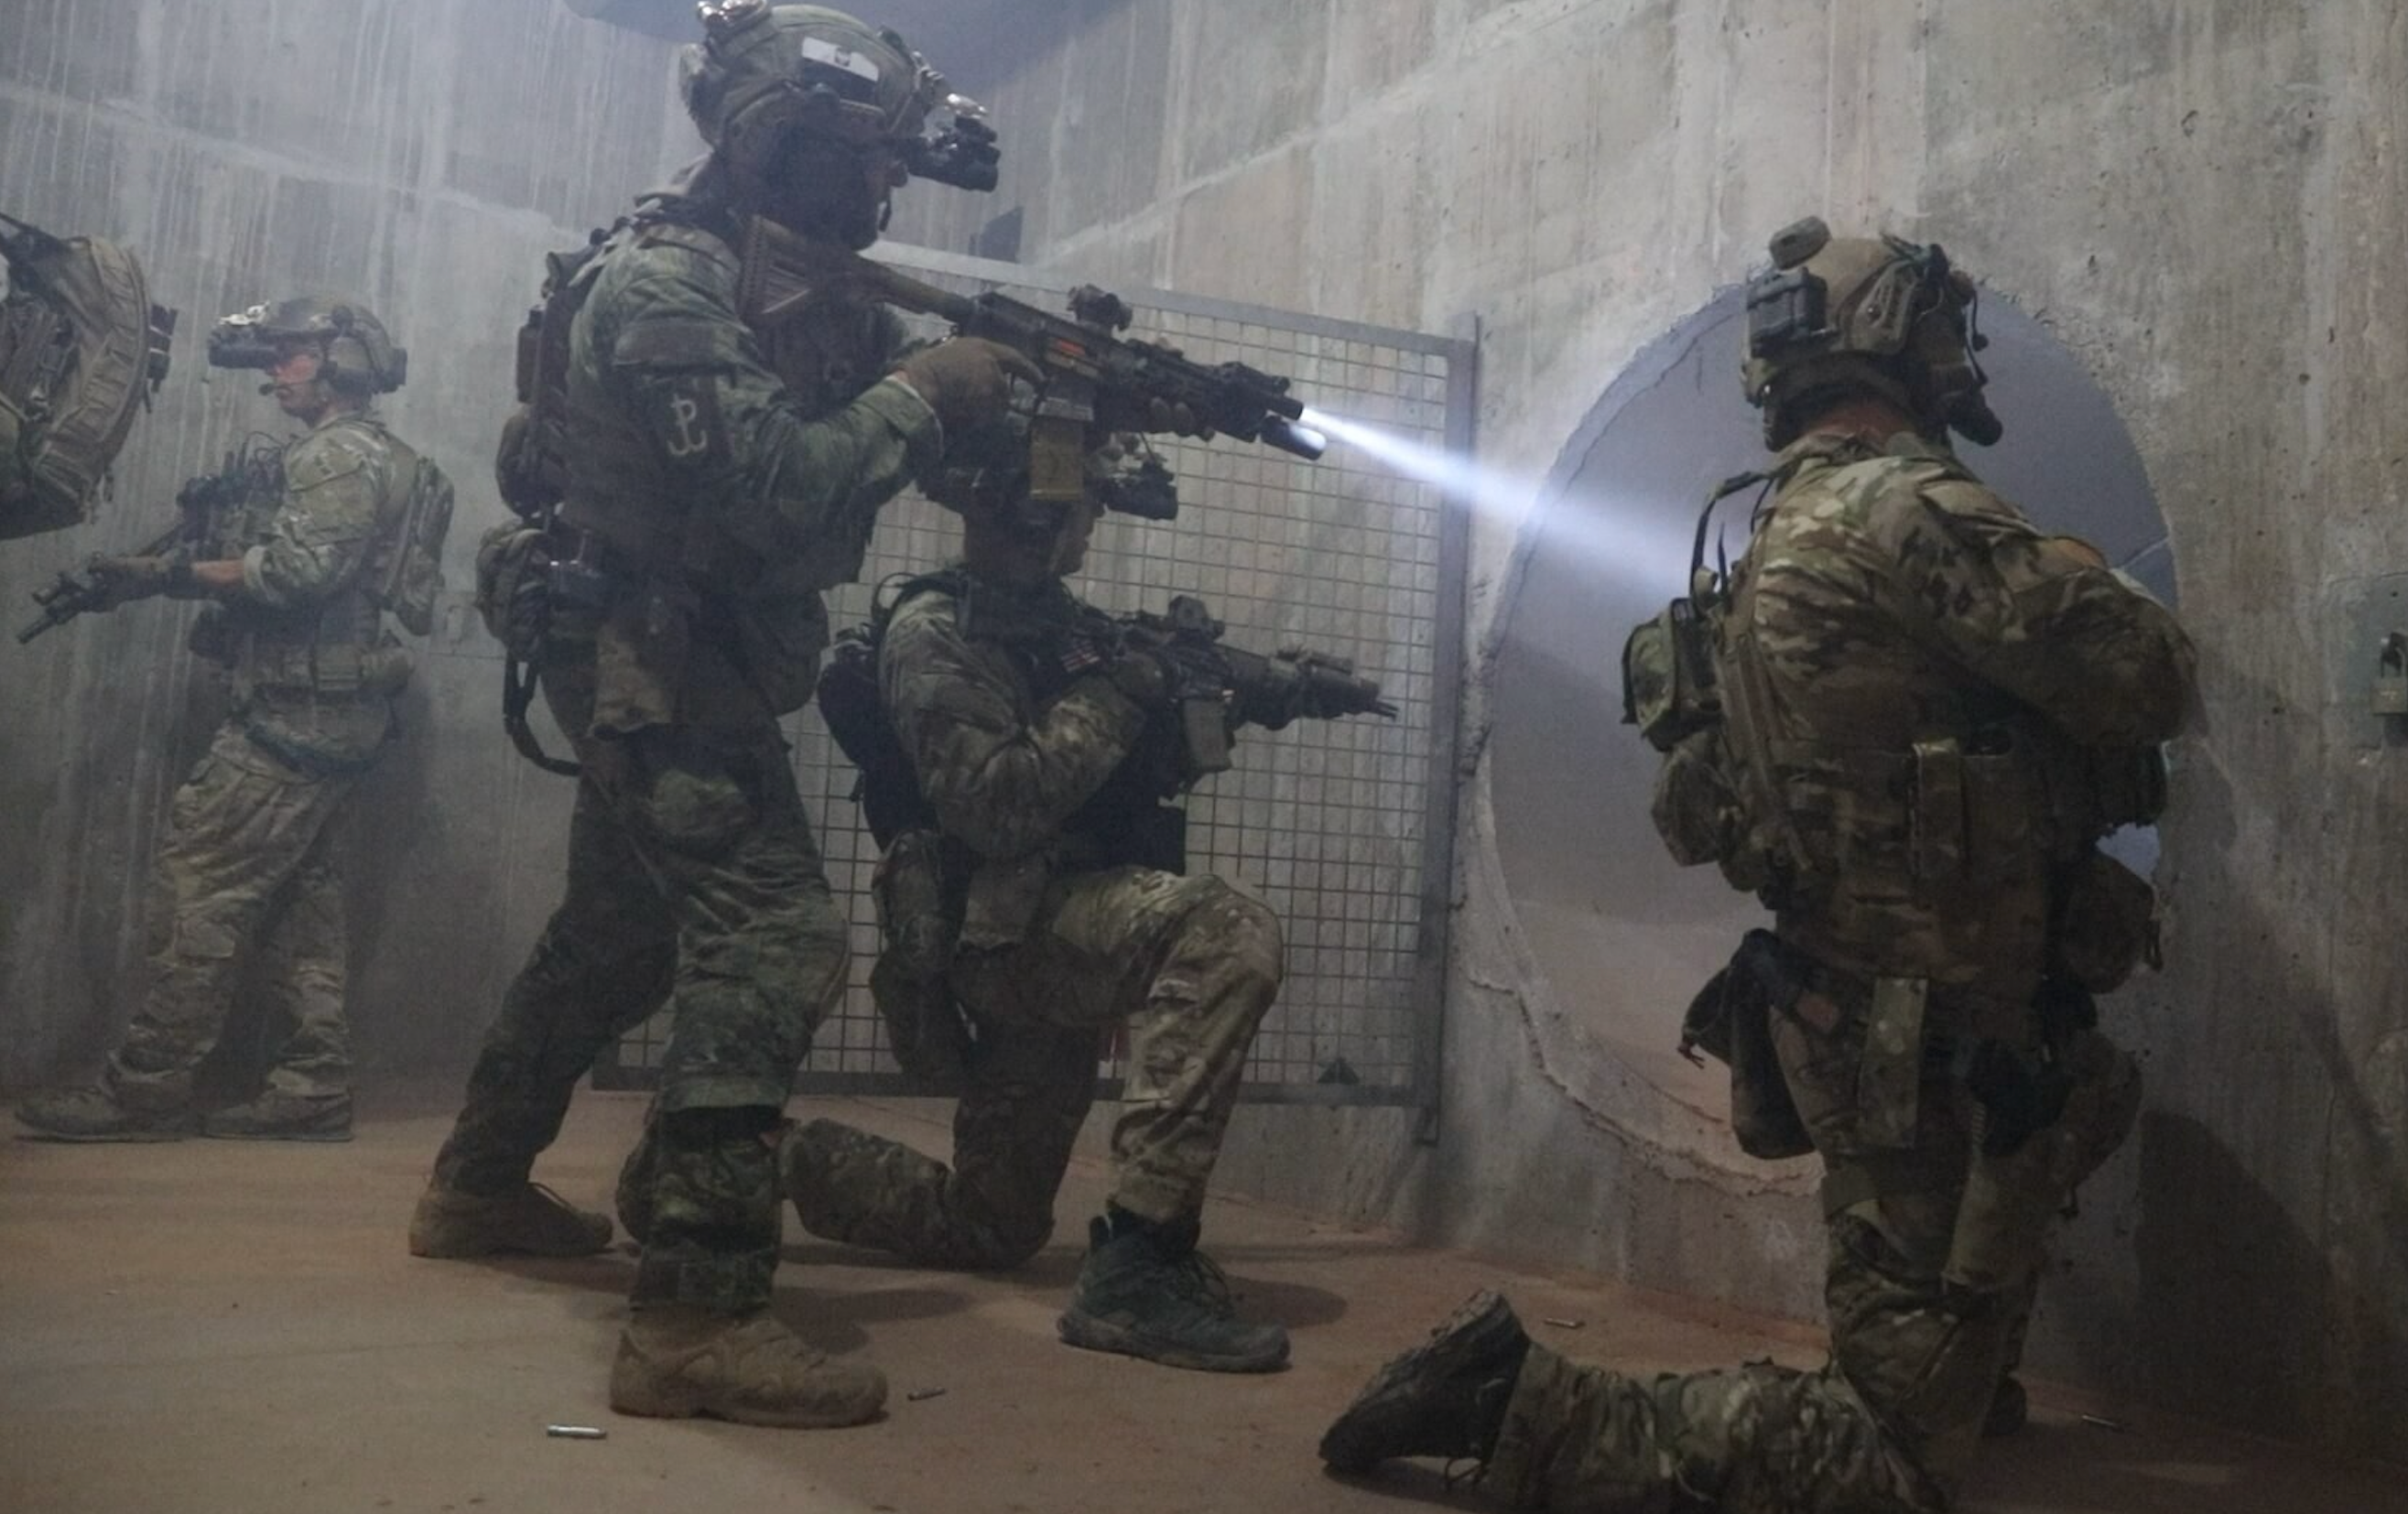 U.S. Army Green Berets assigned to 10th Special Forces Group (Airborne), conduct Close-Quarters Battle (CQB)